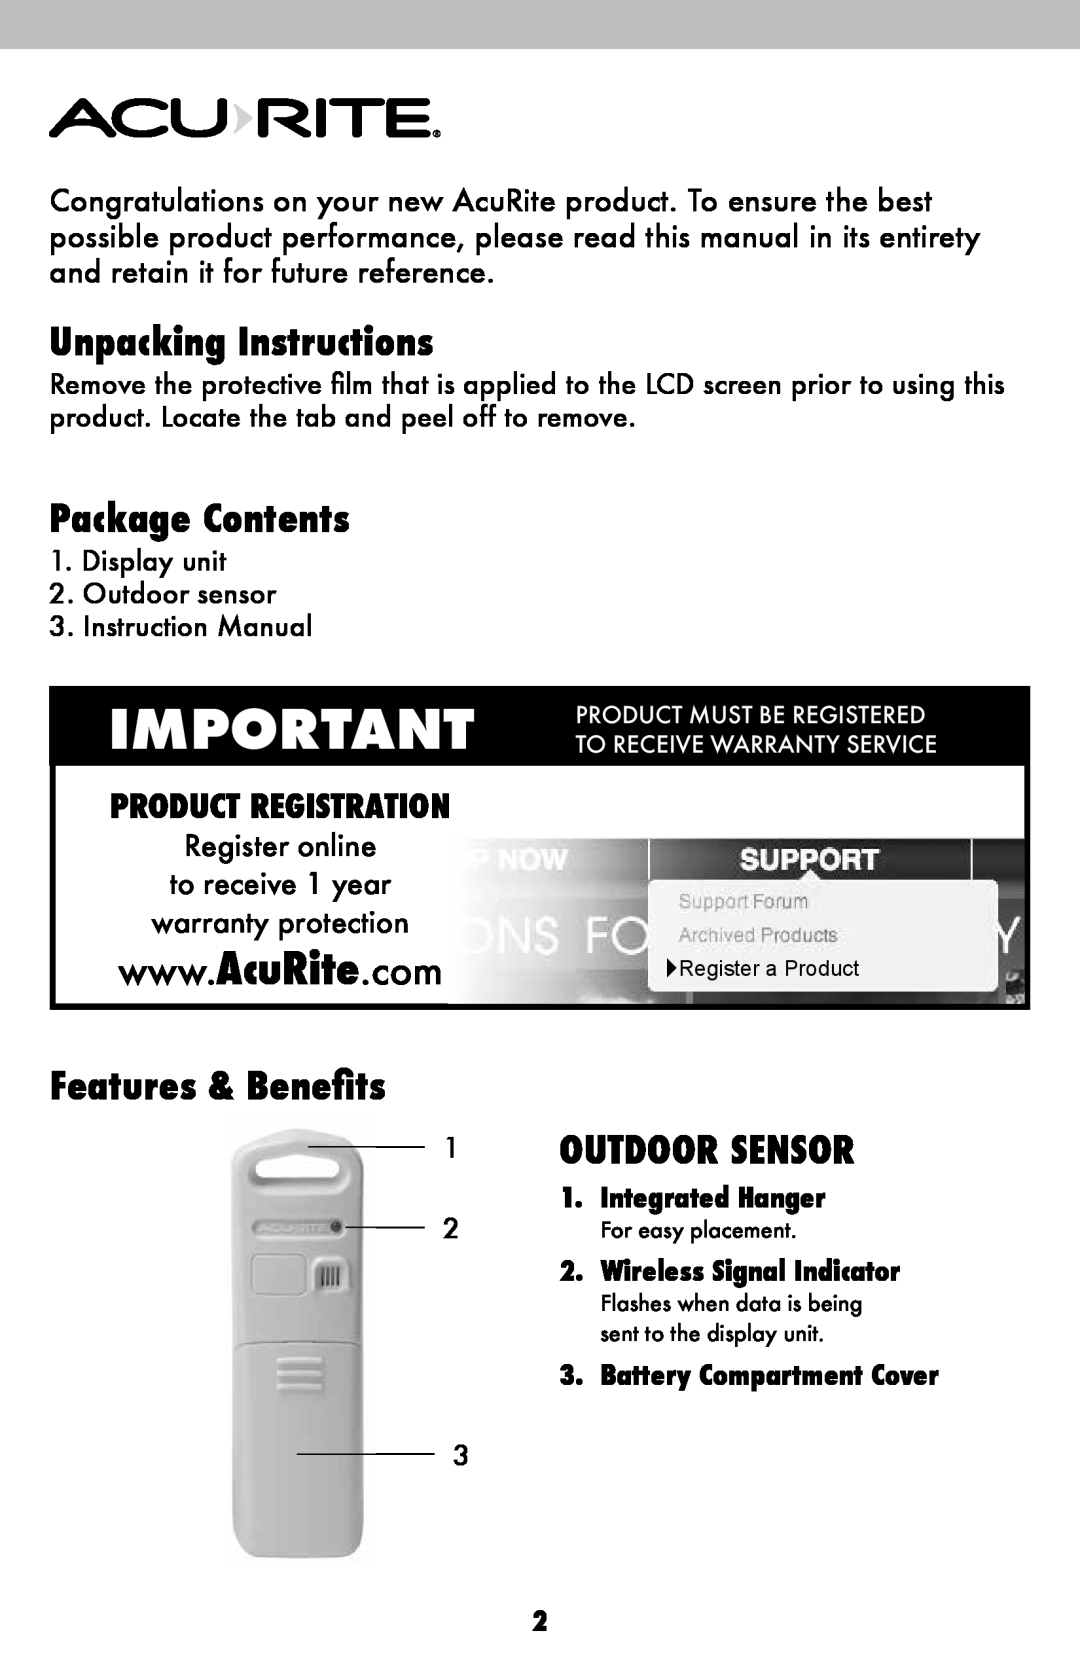 Acu-Rite 827 Unpacking Instructions, Package Contents, Features & Benefits 1 OUTDOOR SENSOR, to receive 1 year 